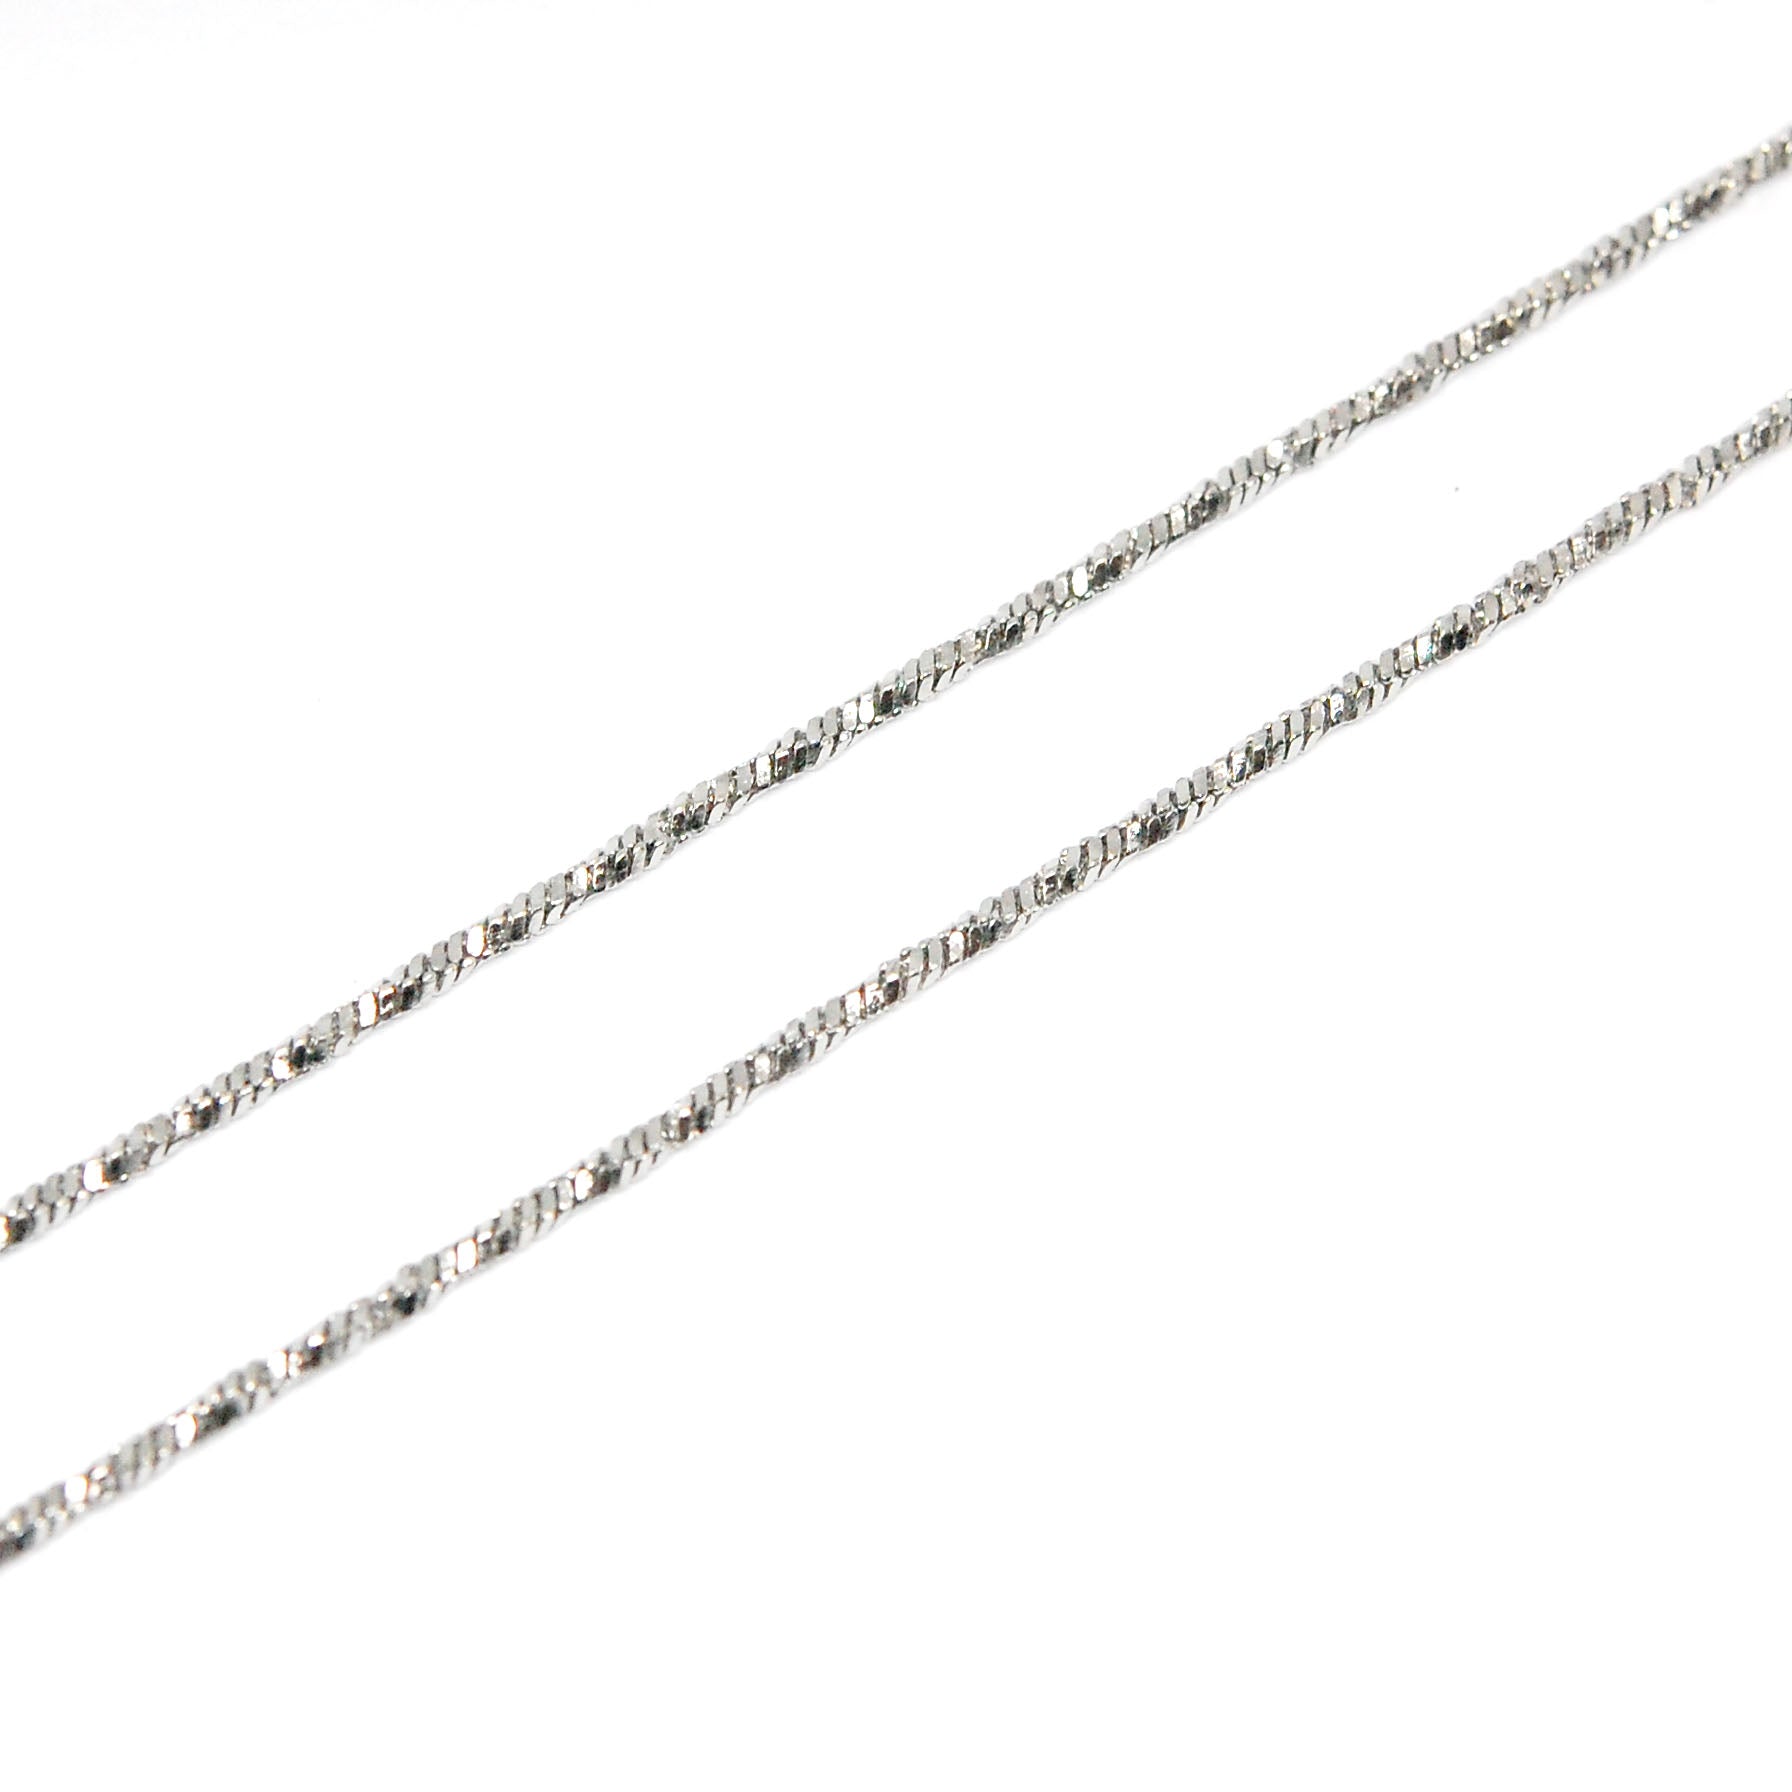 ESCH 7789: 19" S/S Twisted Square Snake Chain